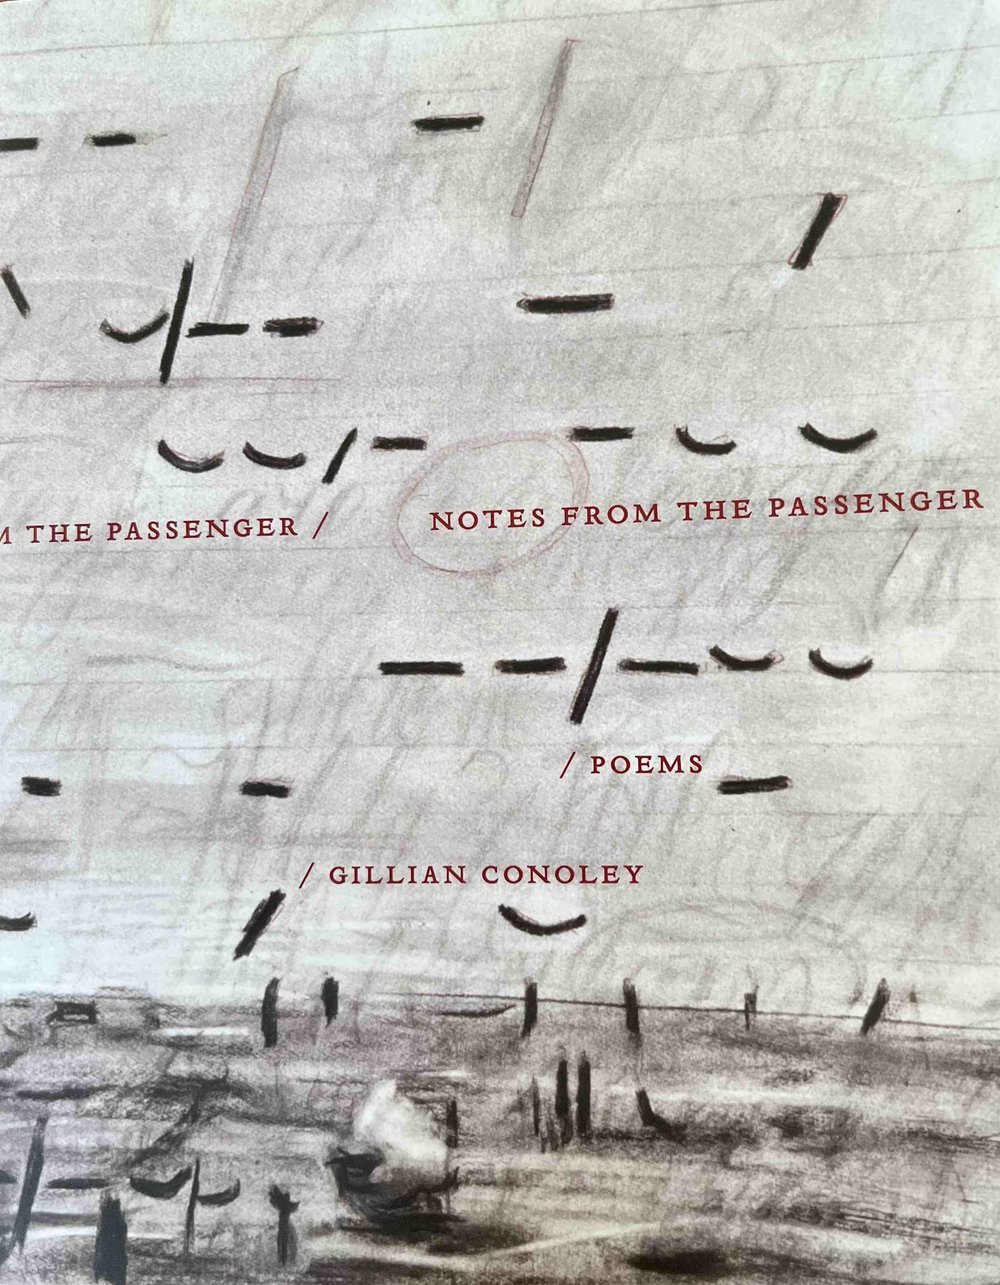 NOTES FROM THE PASSENGER